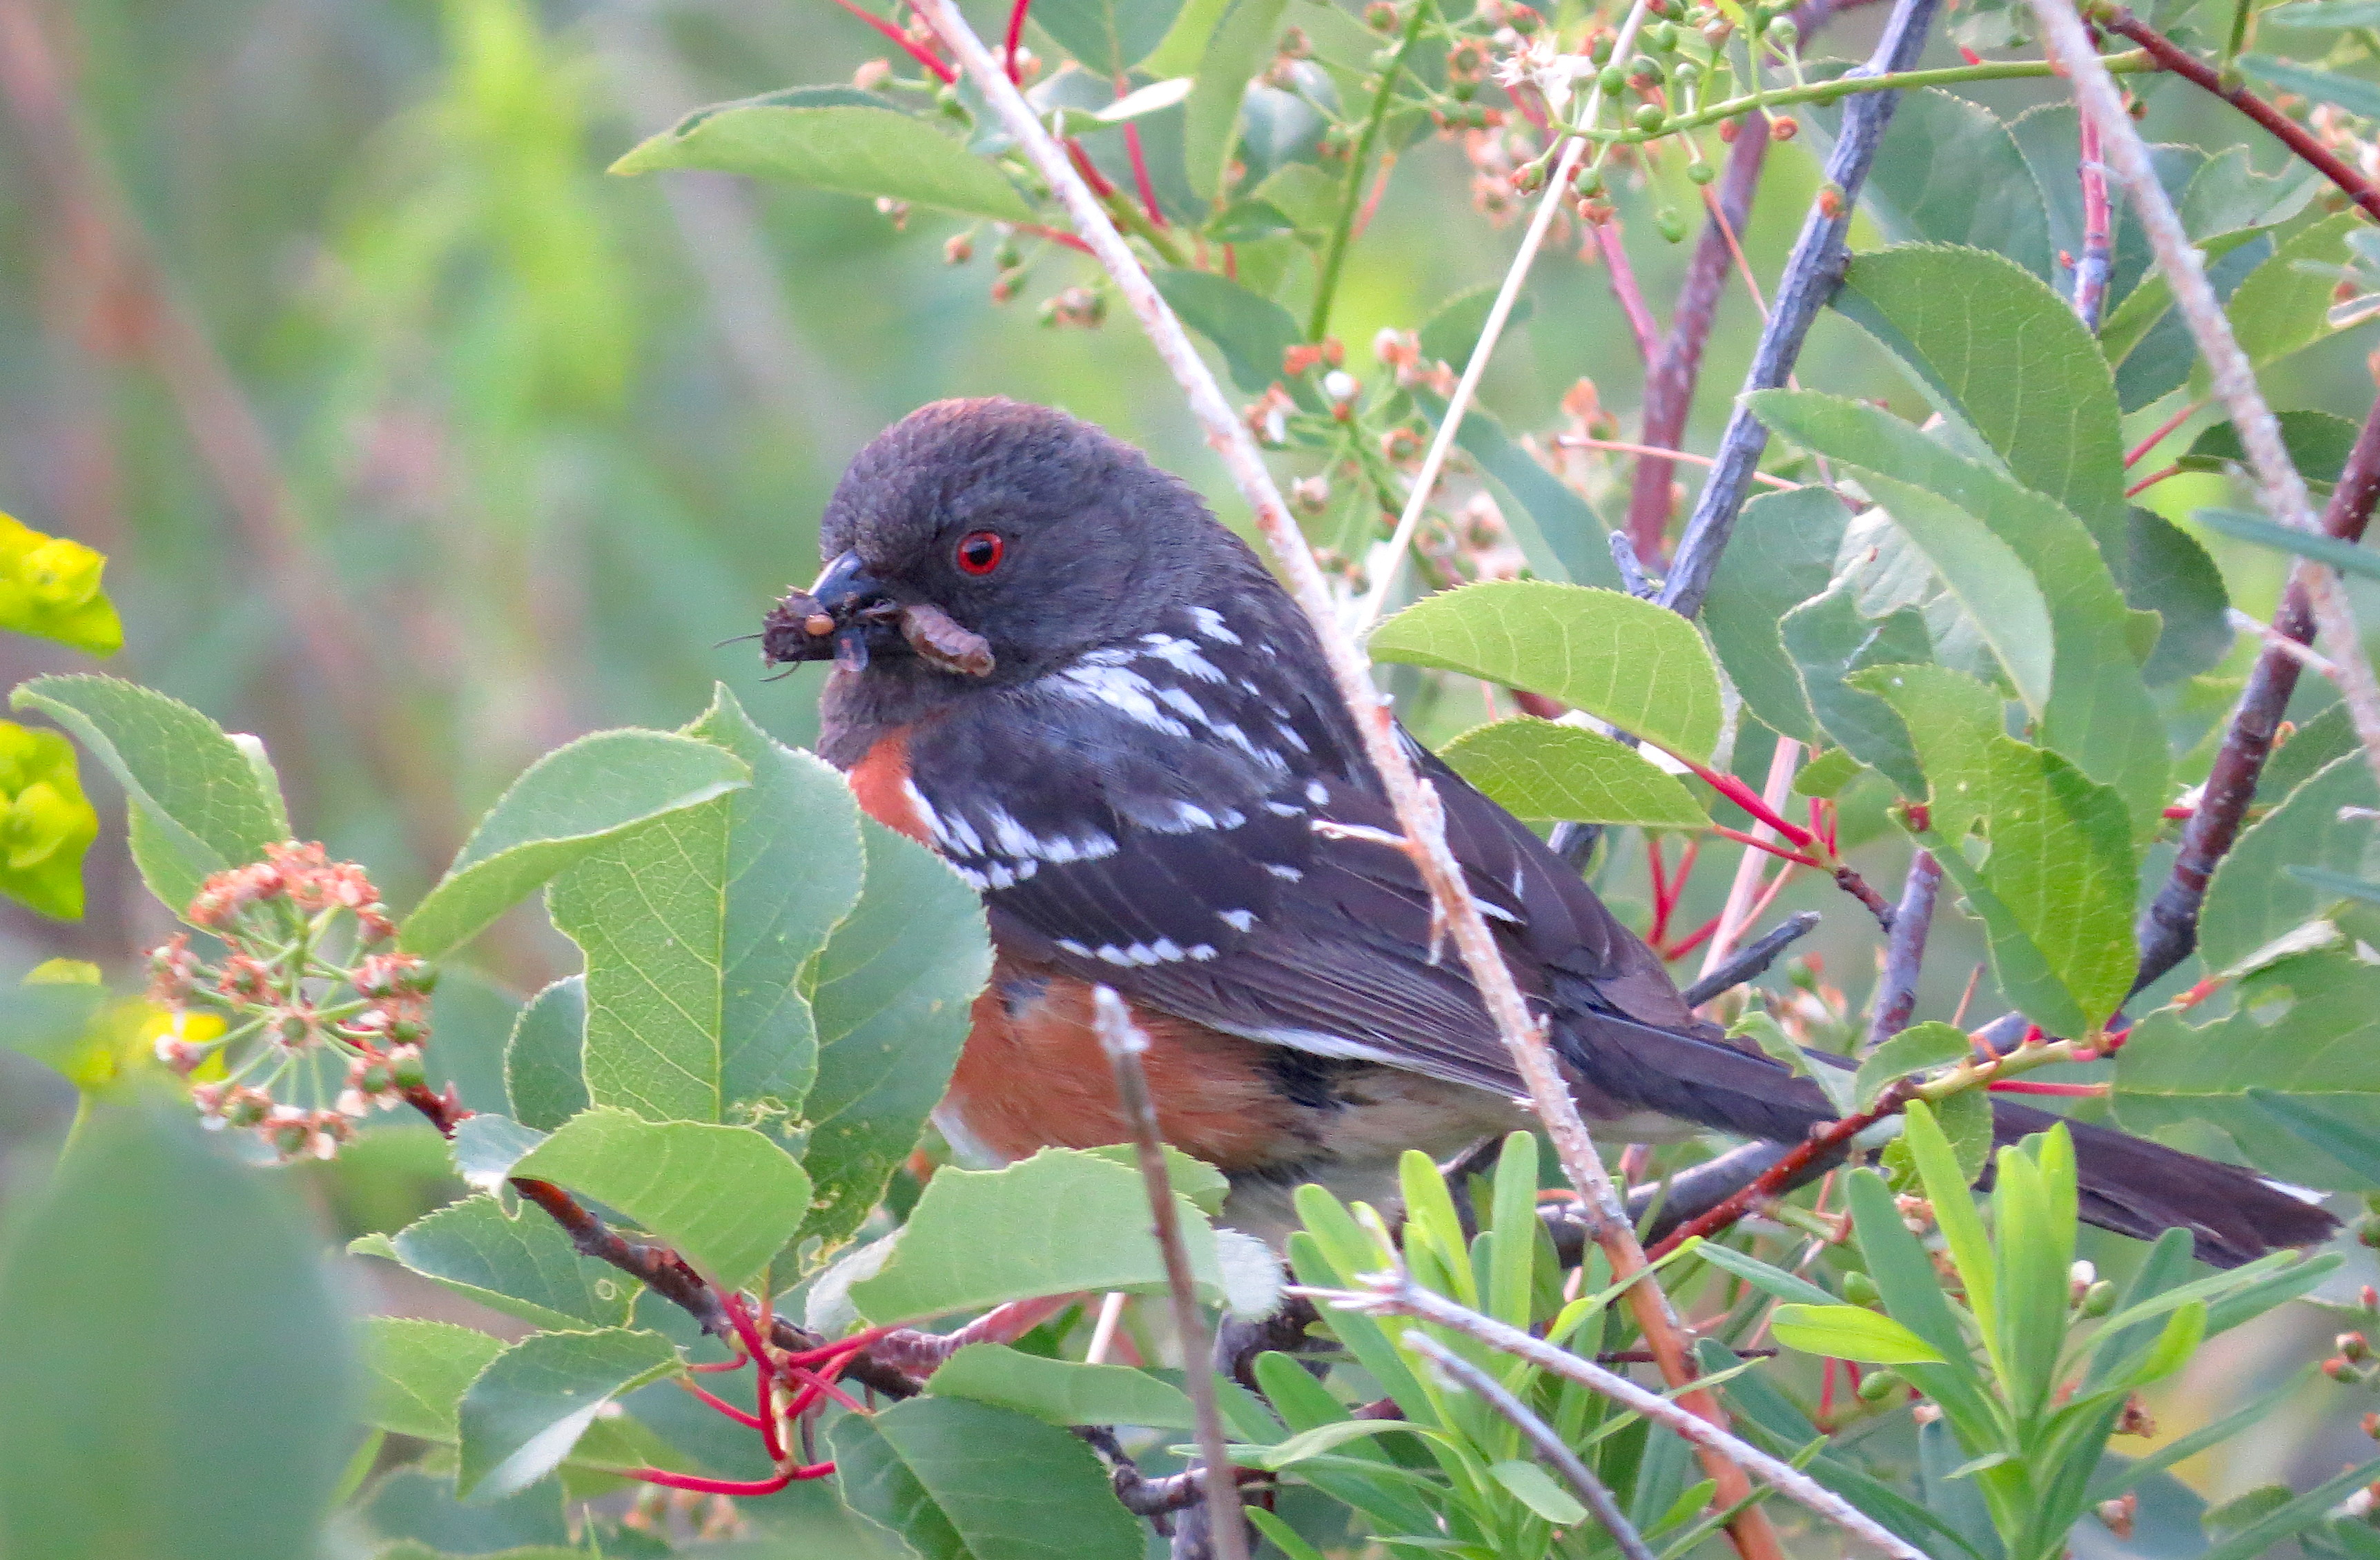 A female Spotted Towhee carries a mouthful of worms to her nestlings.